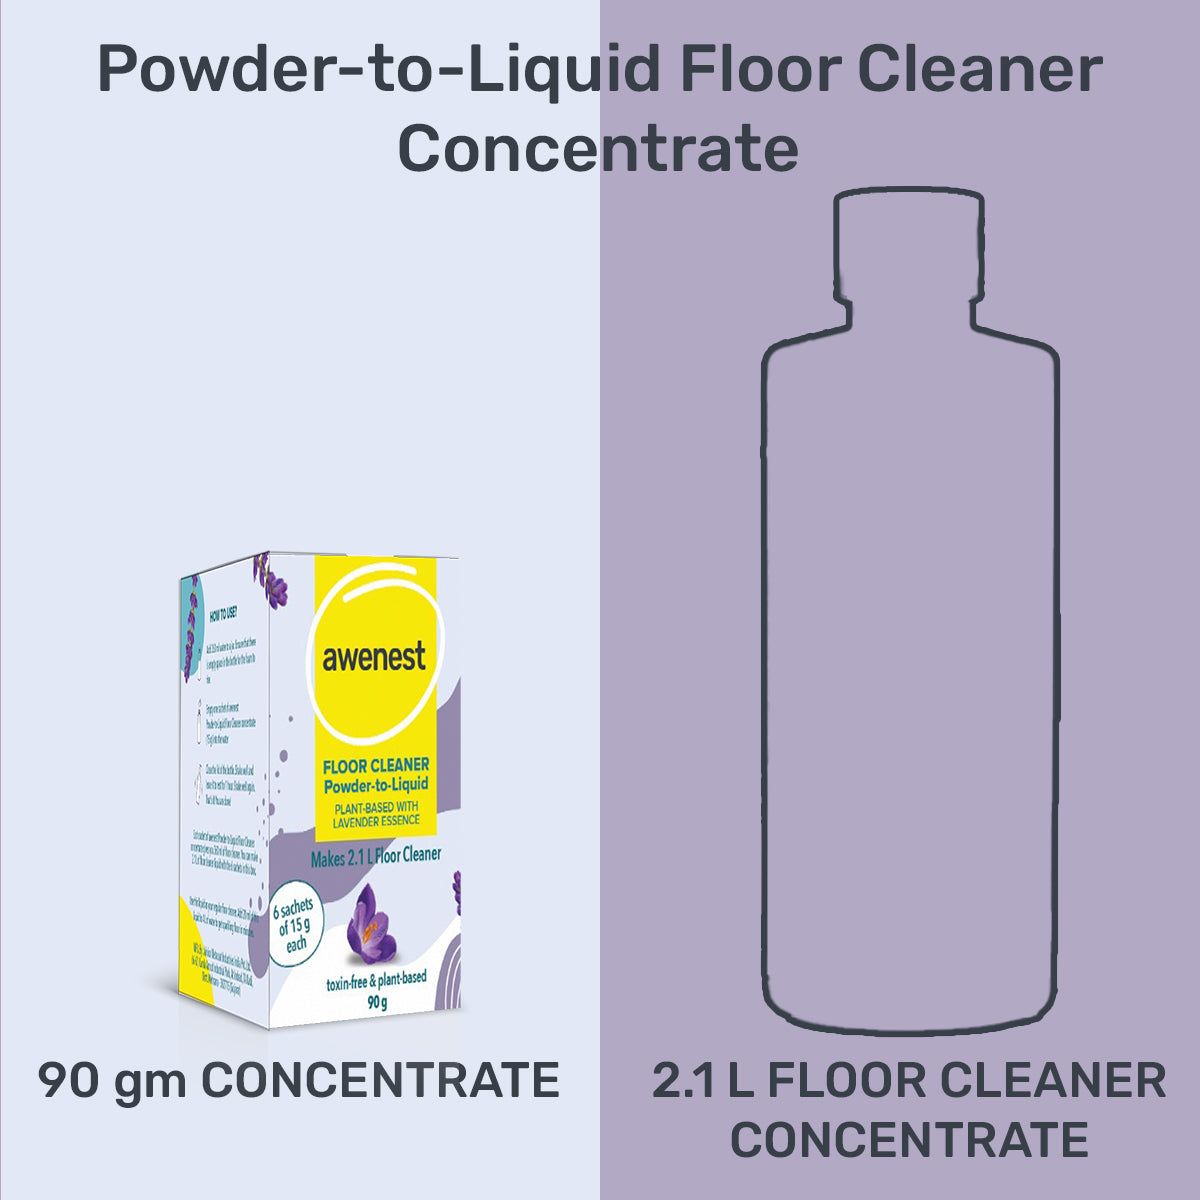 awenest No-toxin powder to liquid disinfectant floor cleaner